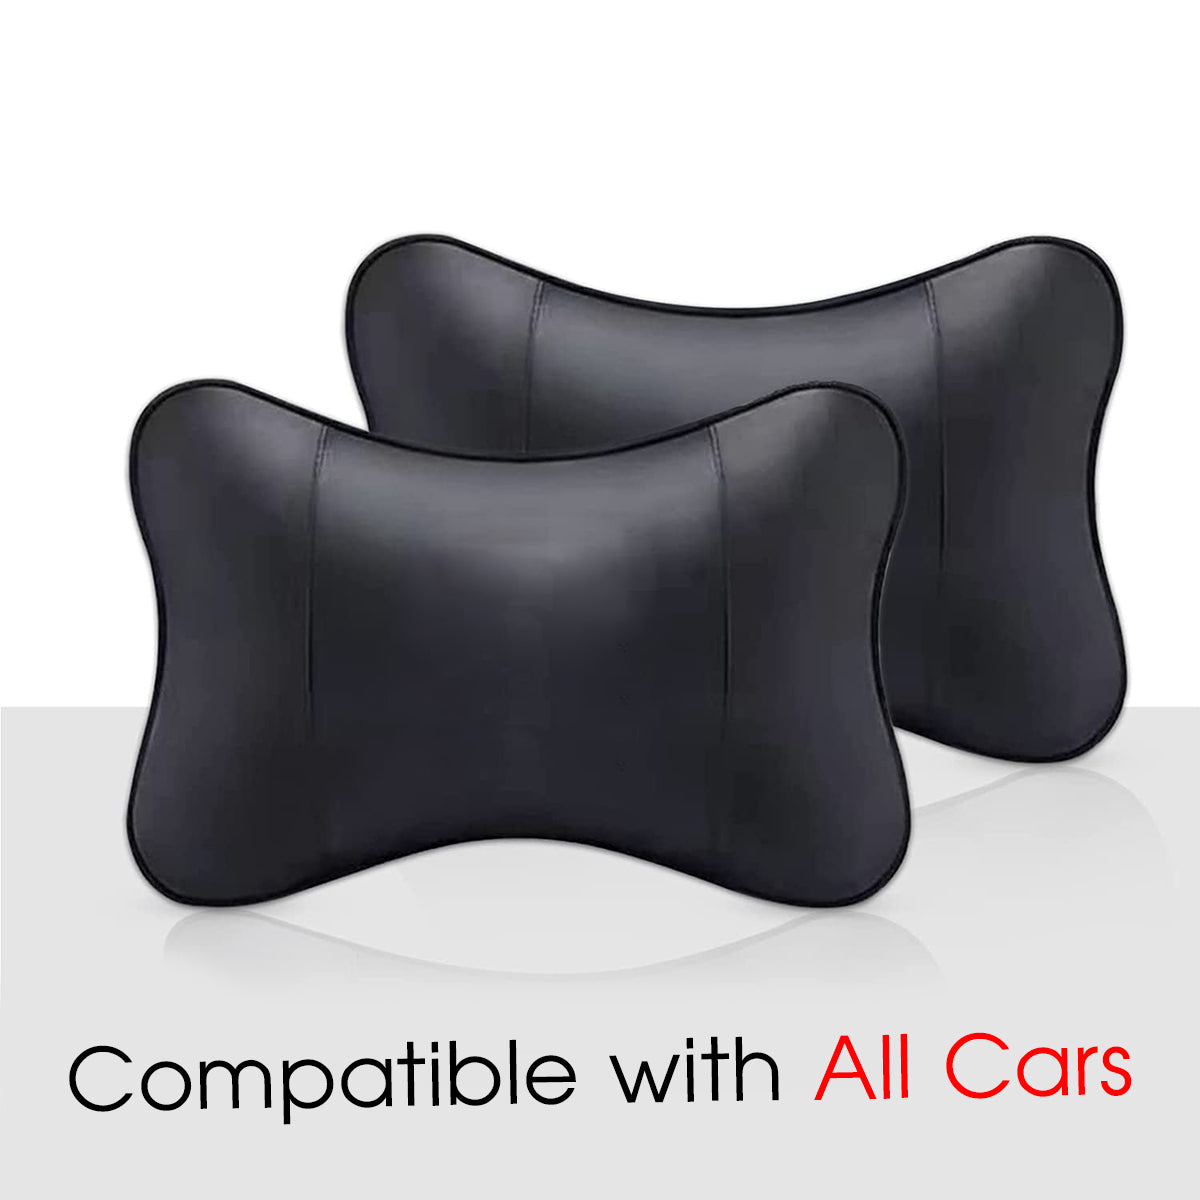 Thickened Foam Car Neck Pillow, Custom For Your Cars, Soft Leather Headrest (2 Pieces) for Driving Home Office, Car Accessories LR13990